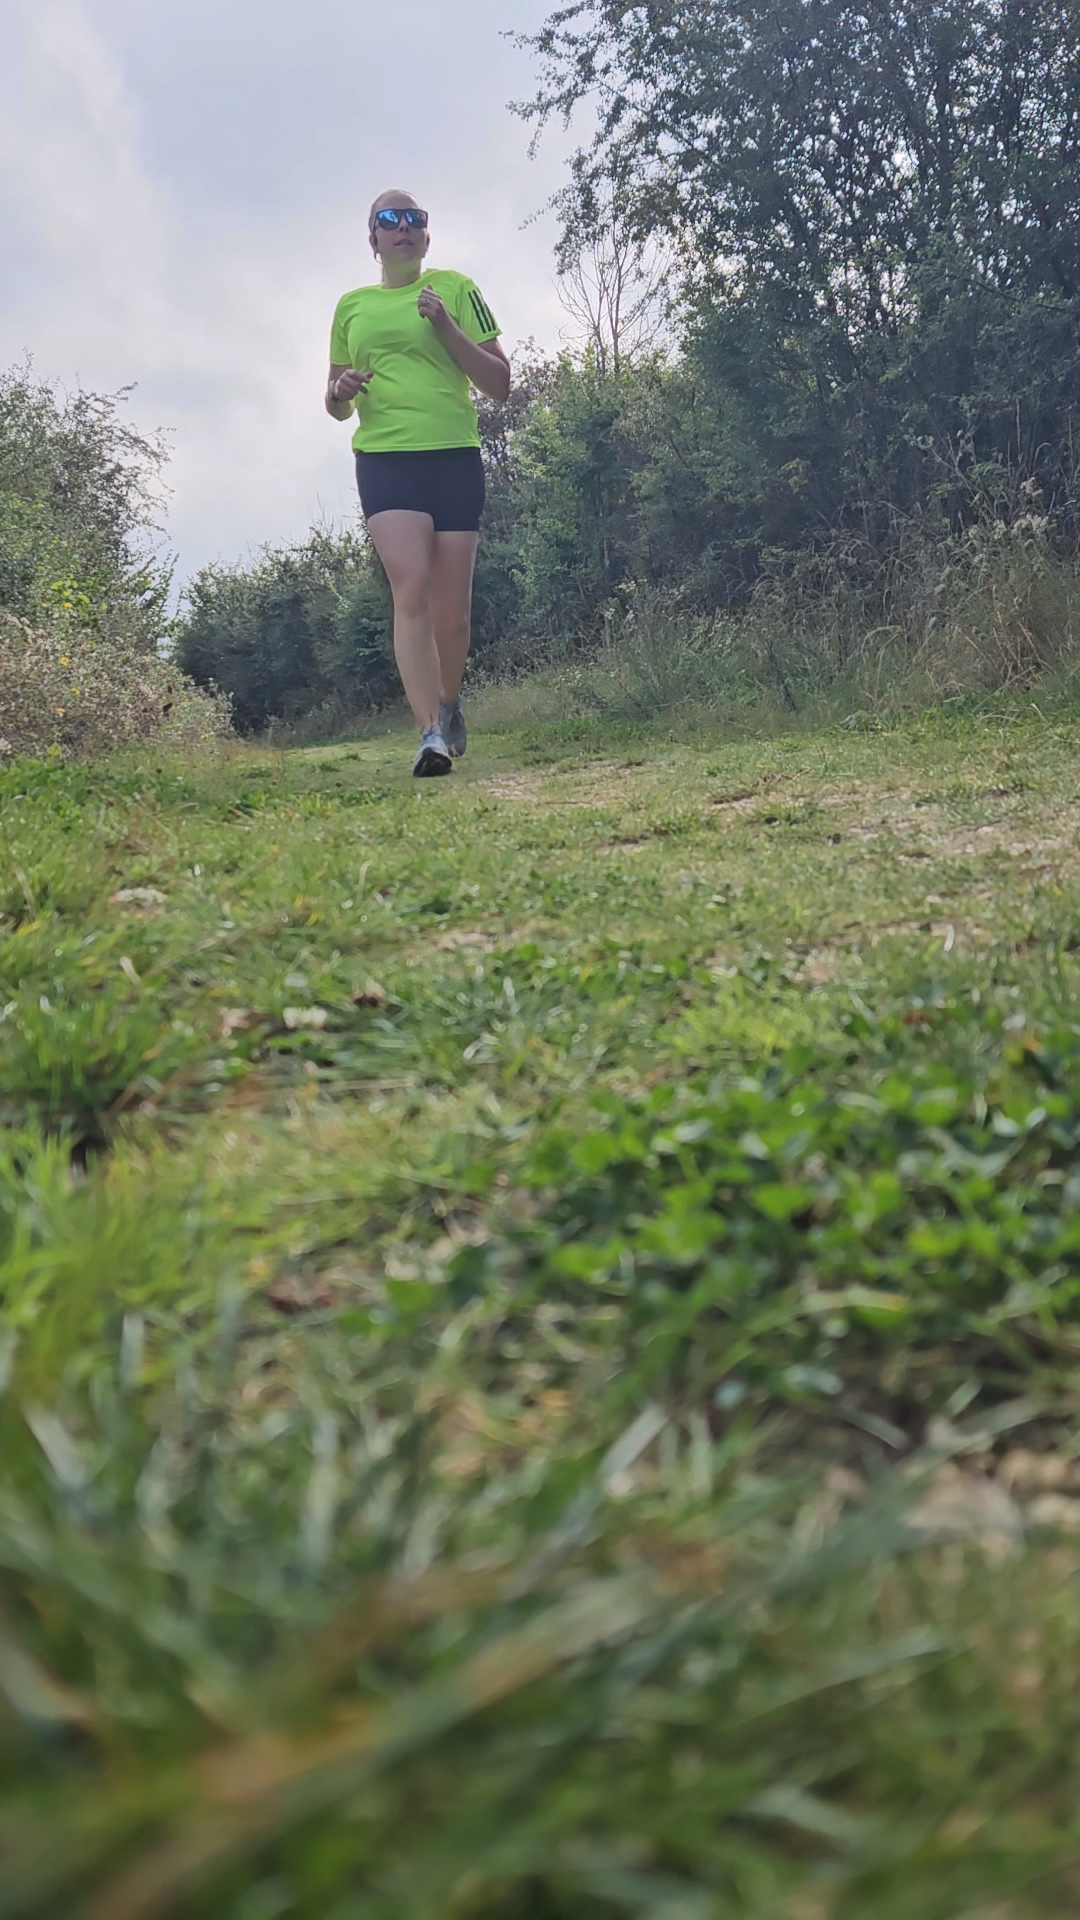 grassy running trail with woman in black shorts and yellow top running towards the camera